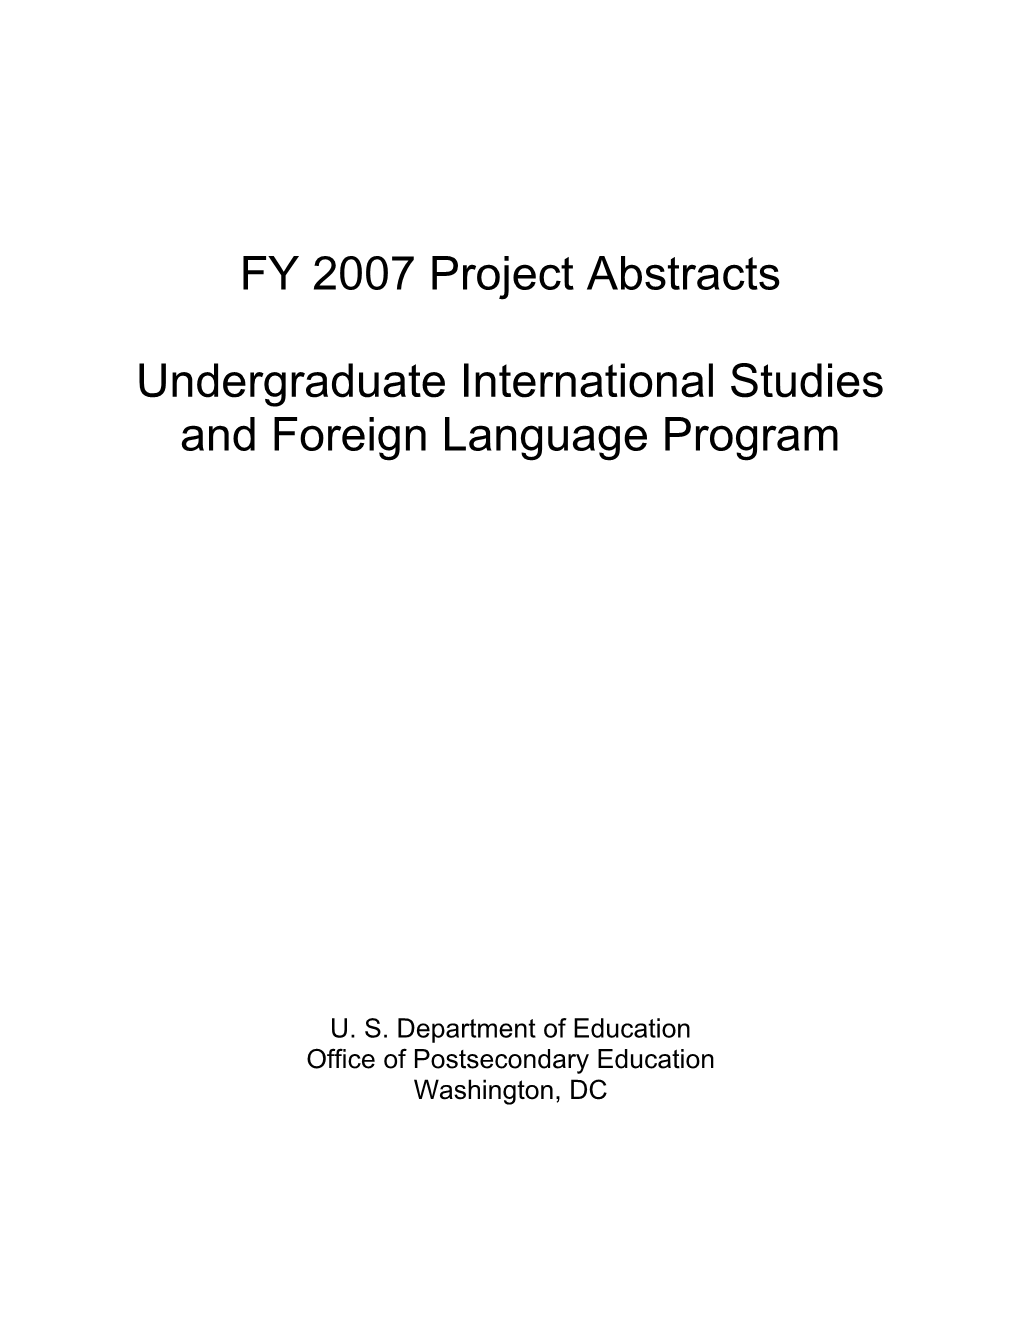 Project Abstracts 2007 for the Undergraduate International Studies and Foreign Language